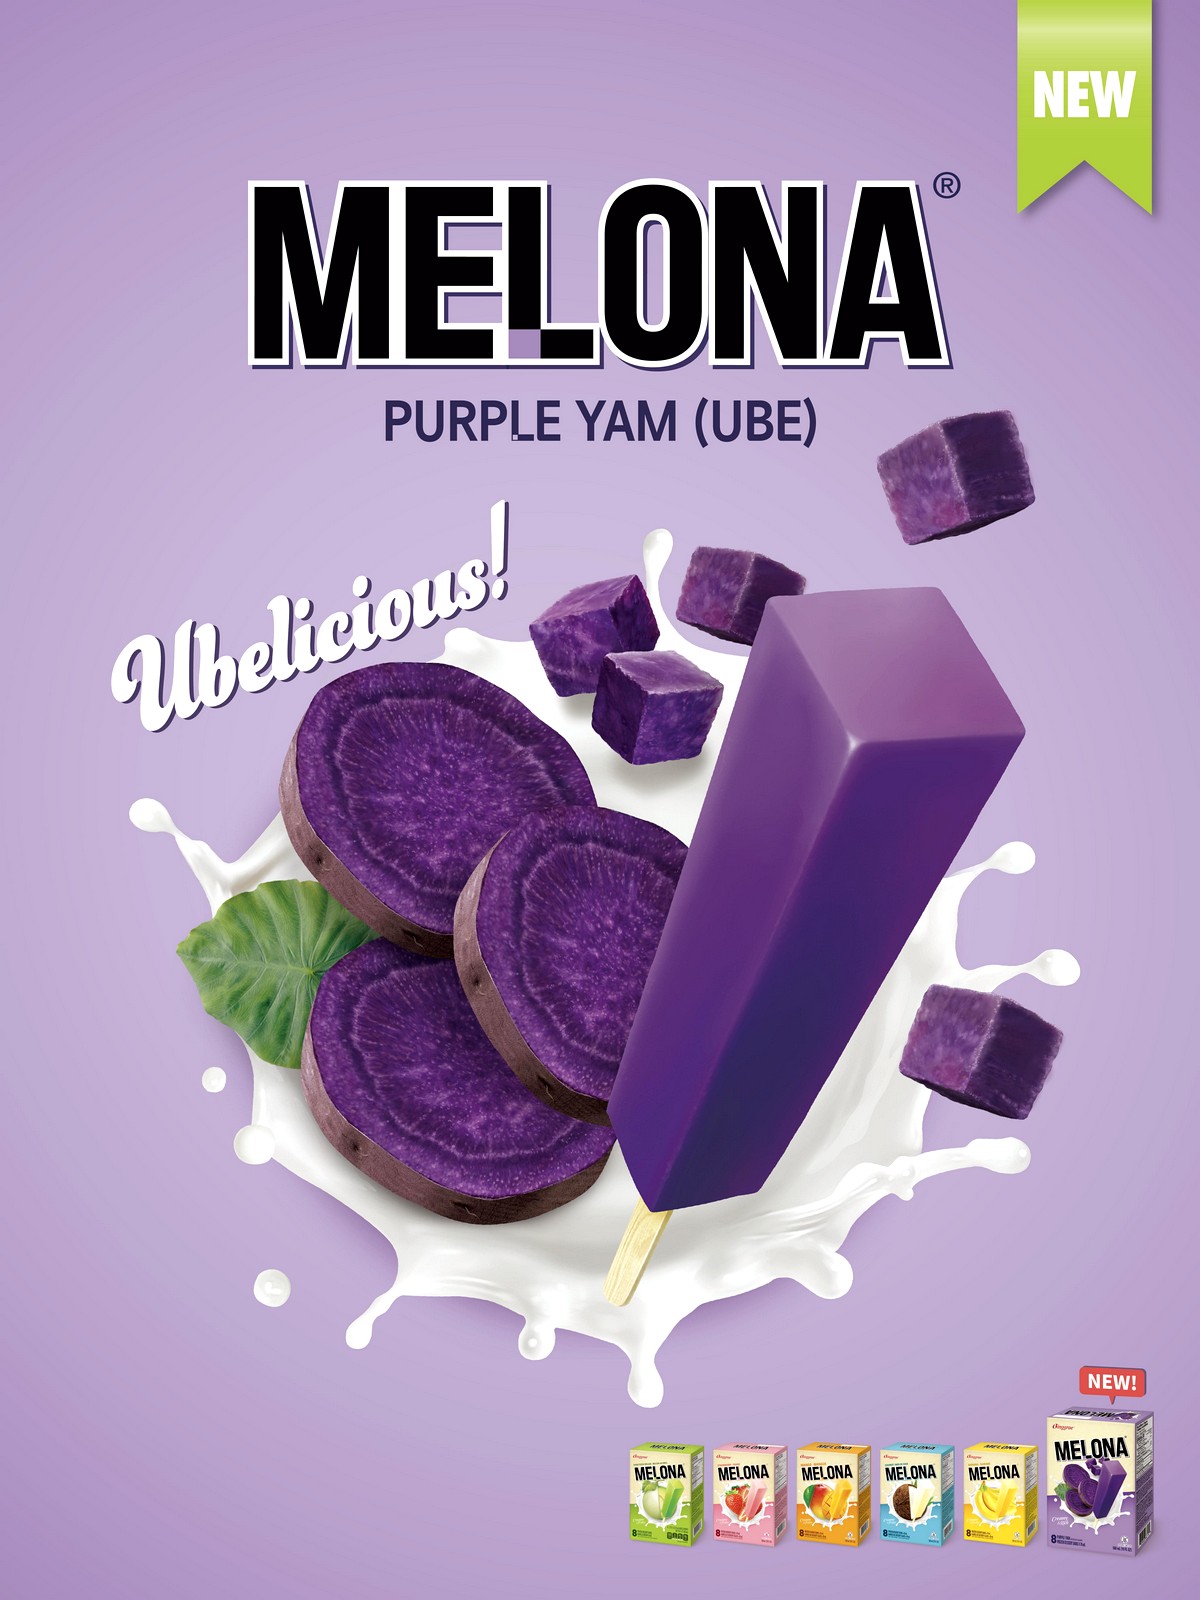 Melona-Taro-Poster-2 Today Onwards: Binggrae All New Melona Taro Ice Cream Bar! Purple Yam Flavour Available in Singapore Now!